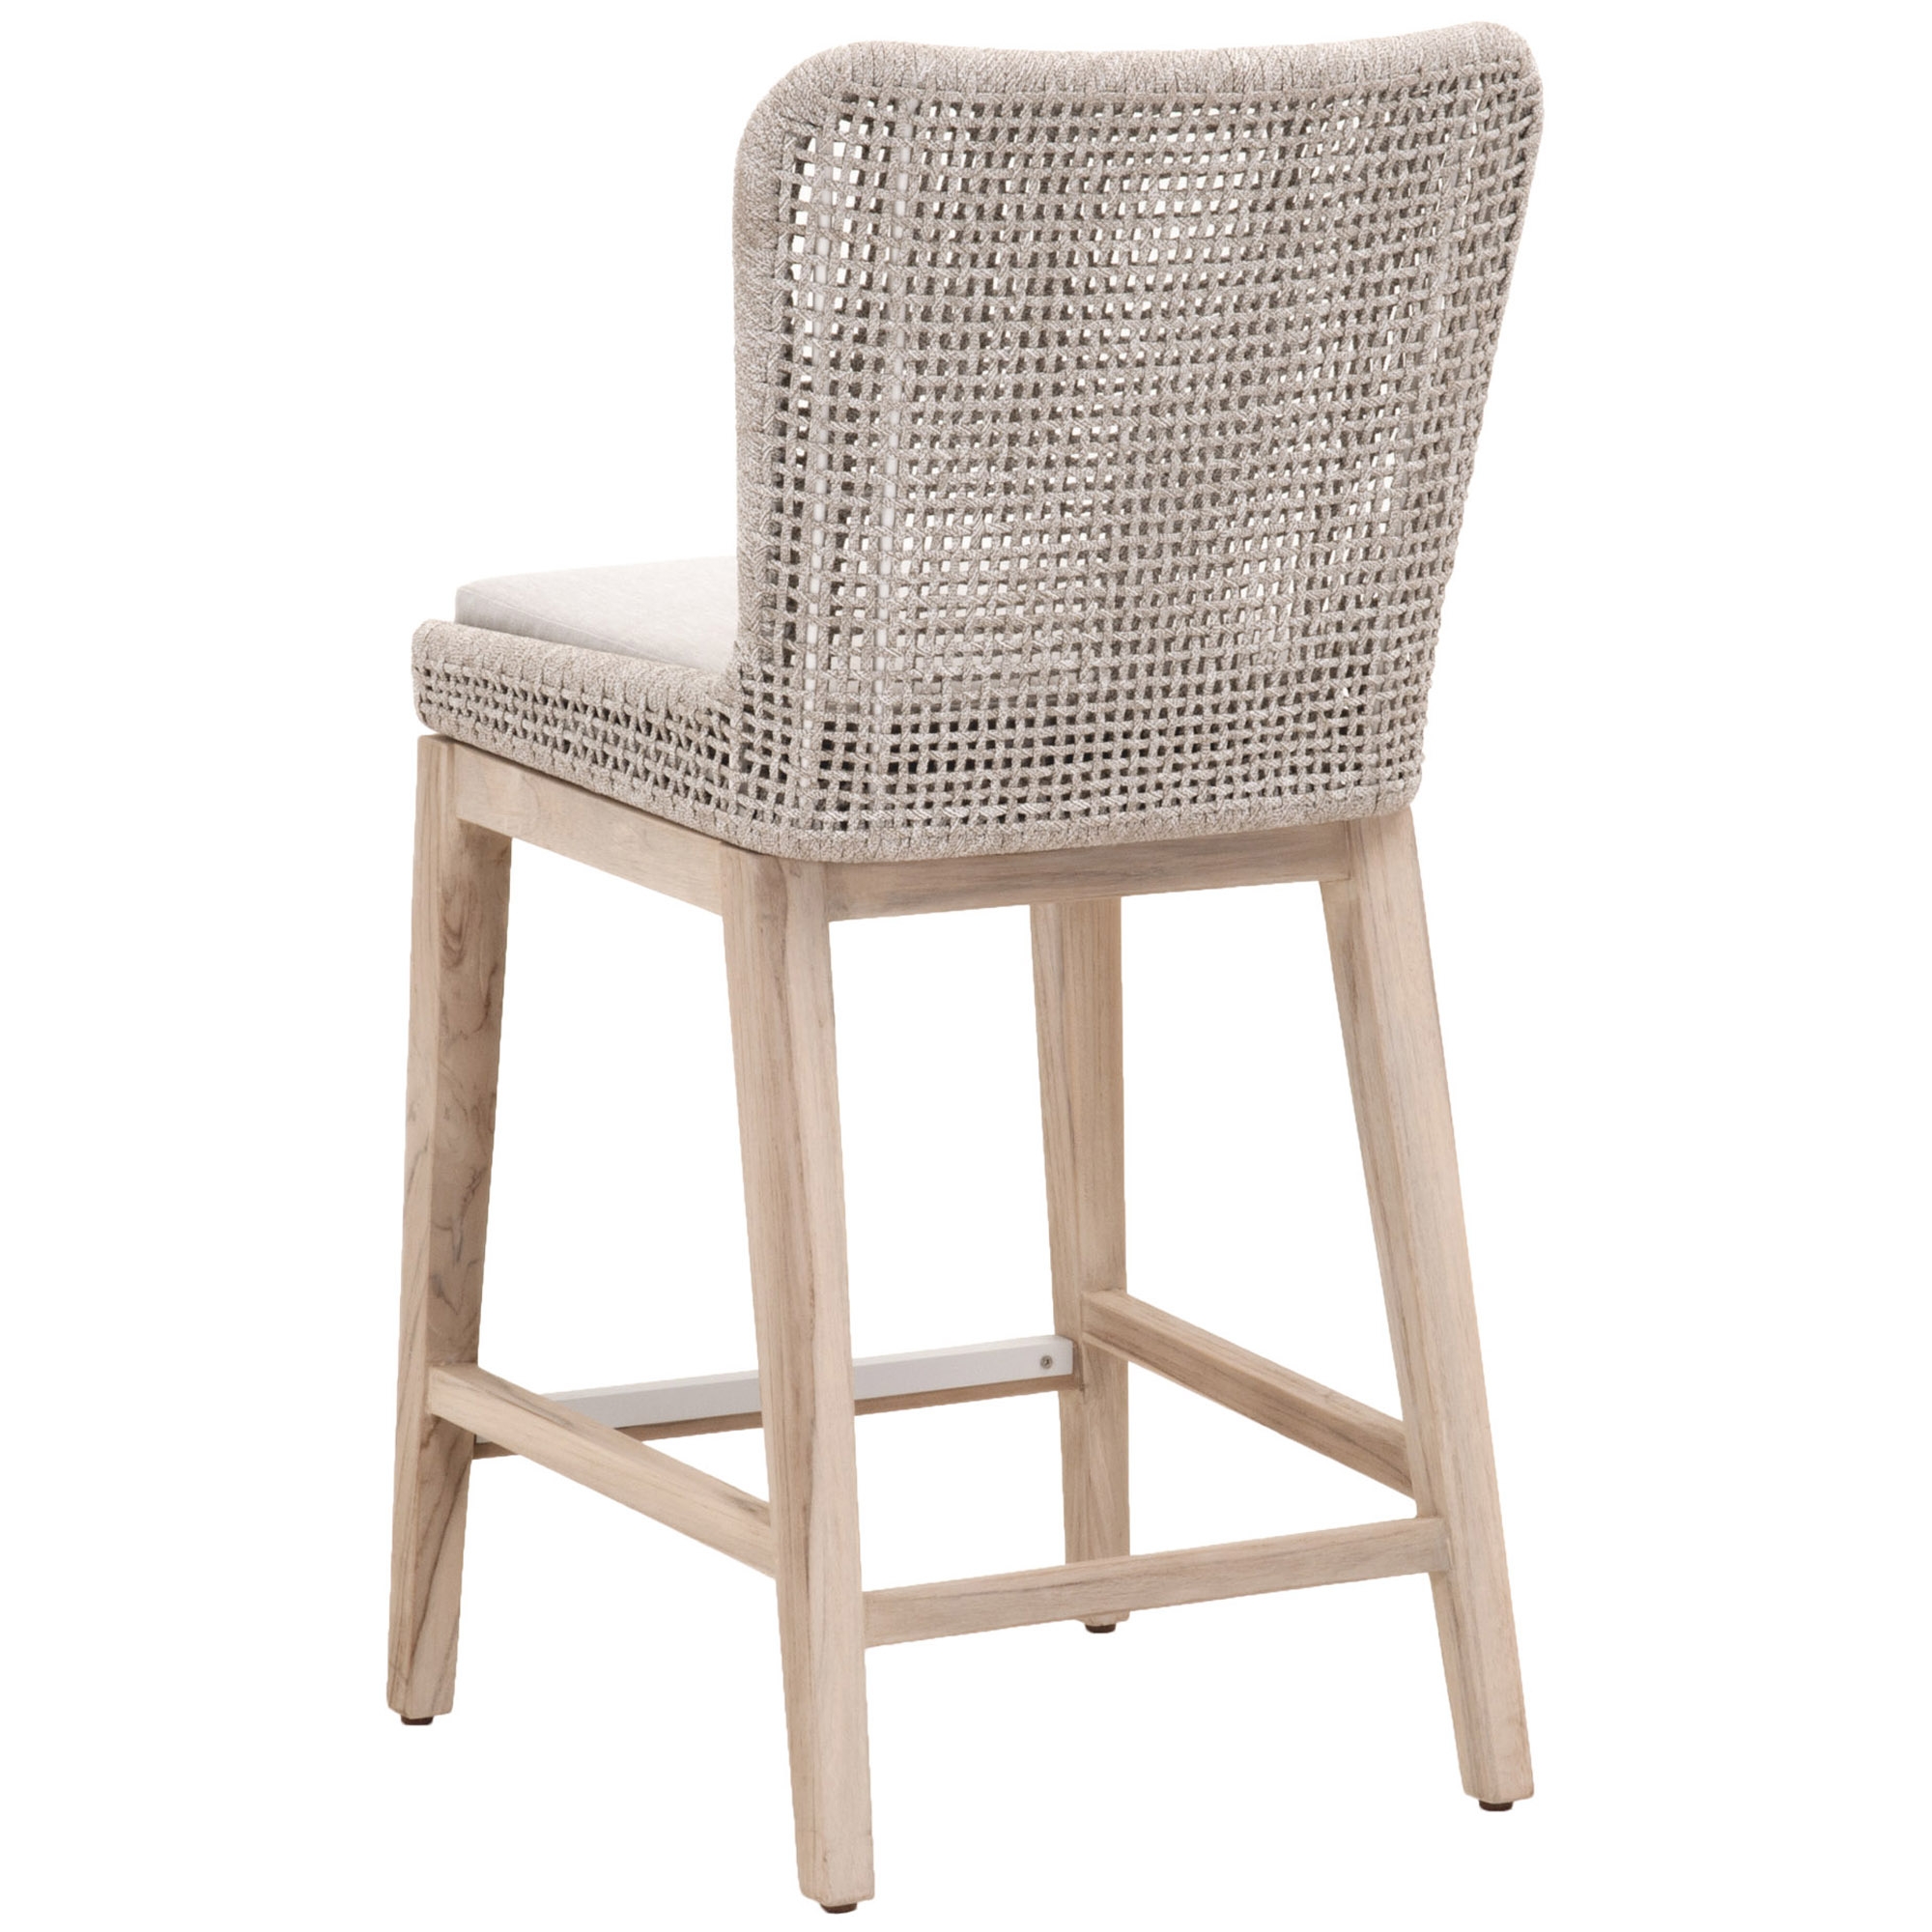 Mesh Outdoor Counter Stool - Image 3